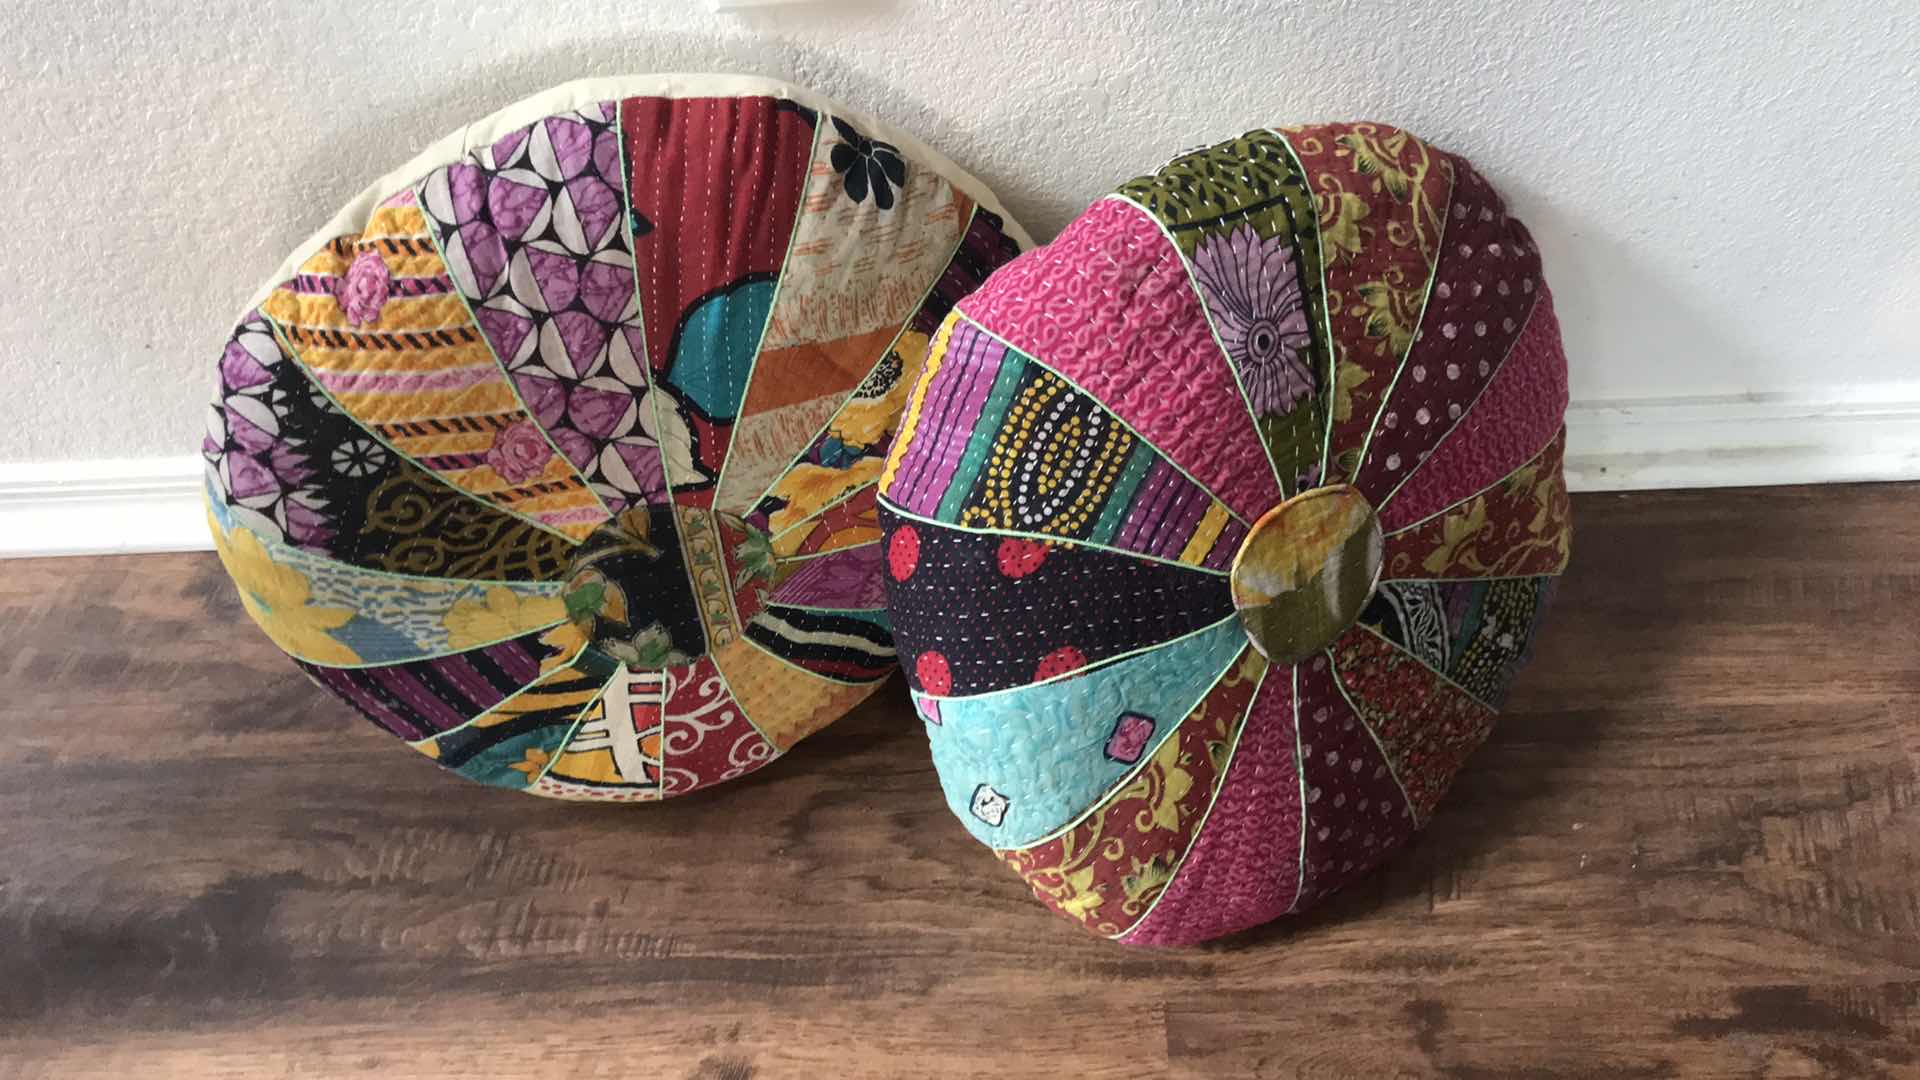 Photo 1 of INDIAN PATCHWORK KANTHA POUF VINTAGE POUF CASE, LARGE ROUND FLOOR PILLOW, HANDMADE SEATING POUFFE,

